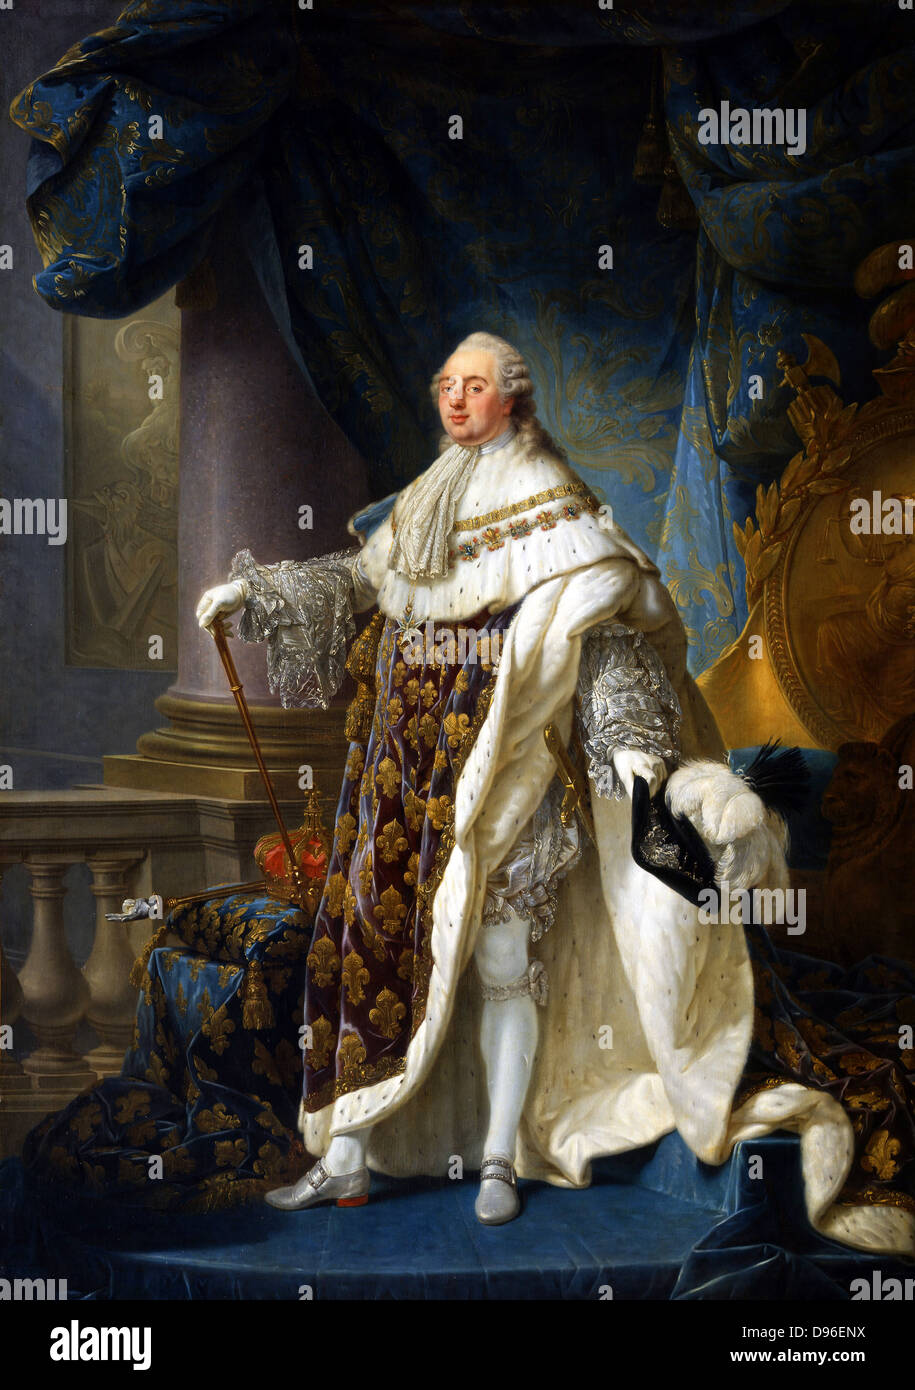 Painting of Louis XVI King of France and Navarre (1754-1793) Wearing his grand royal costume in 1779. Oil on canvas. by Antoine-François Callet. Displayed in the Palace of Versailles. Stock Photo